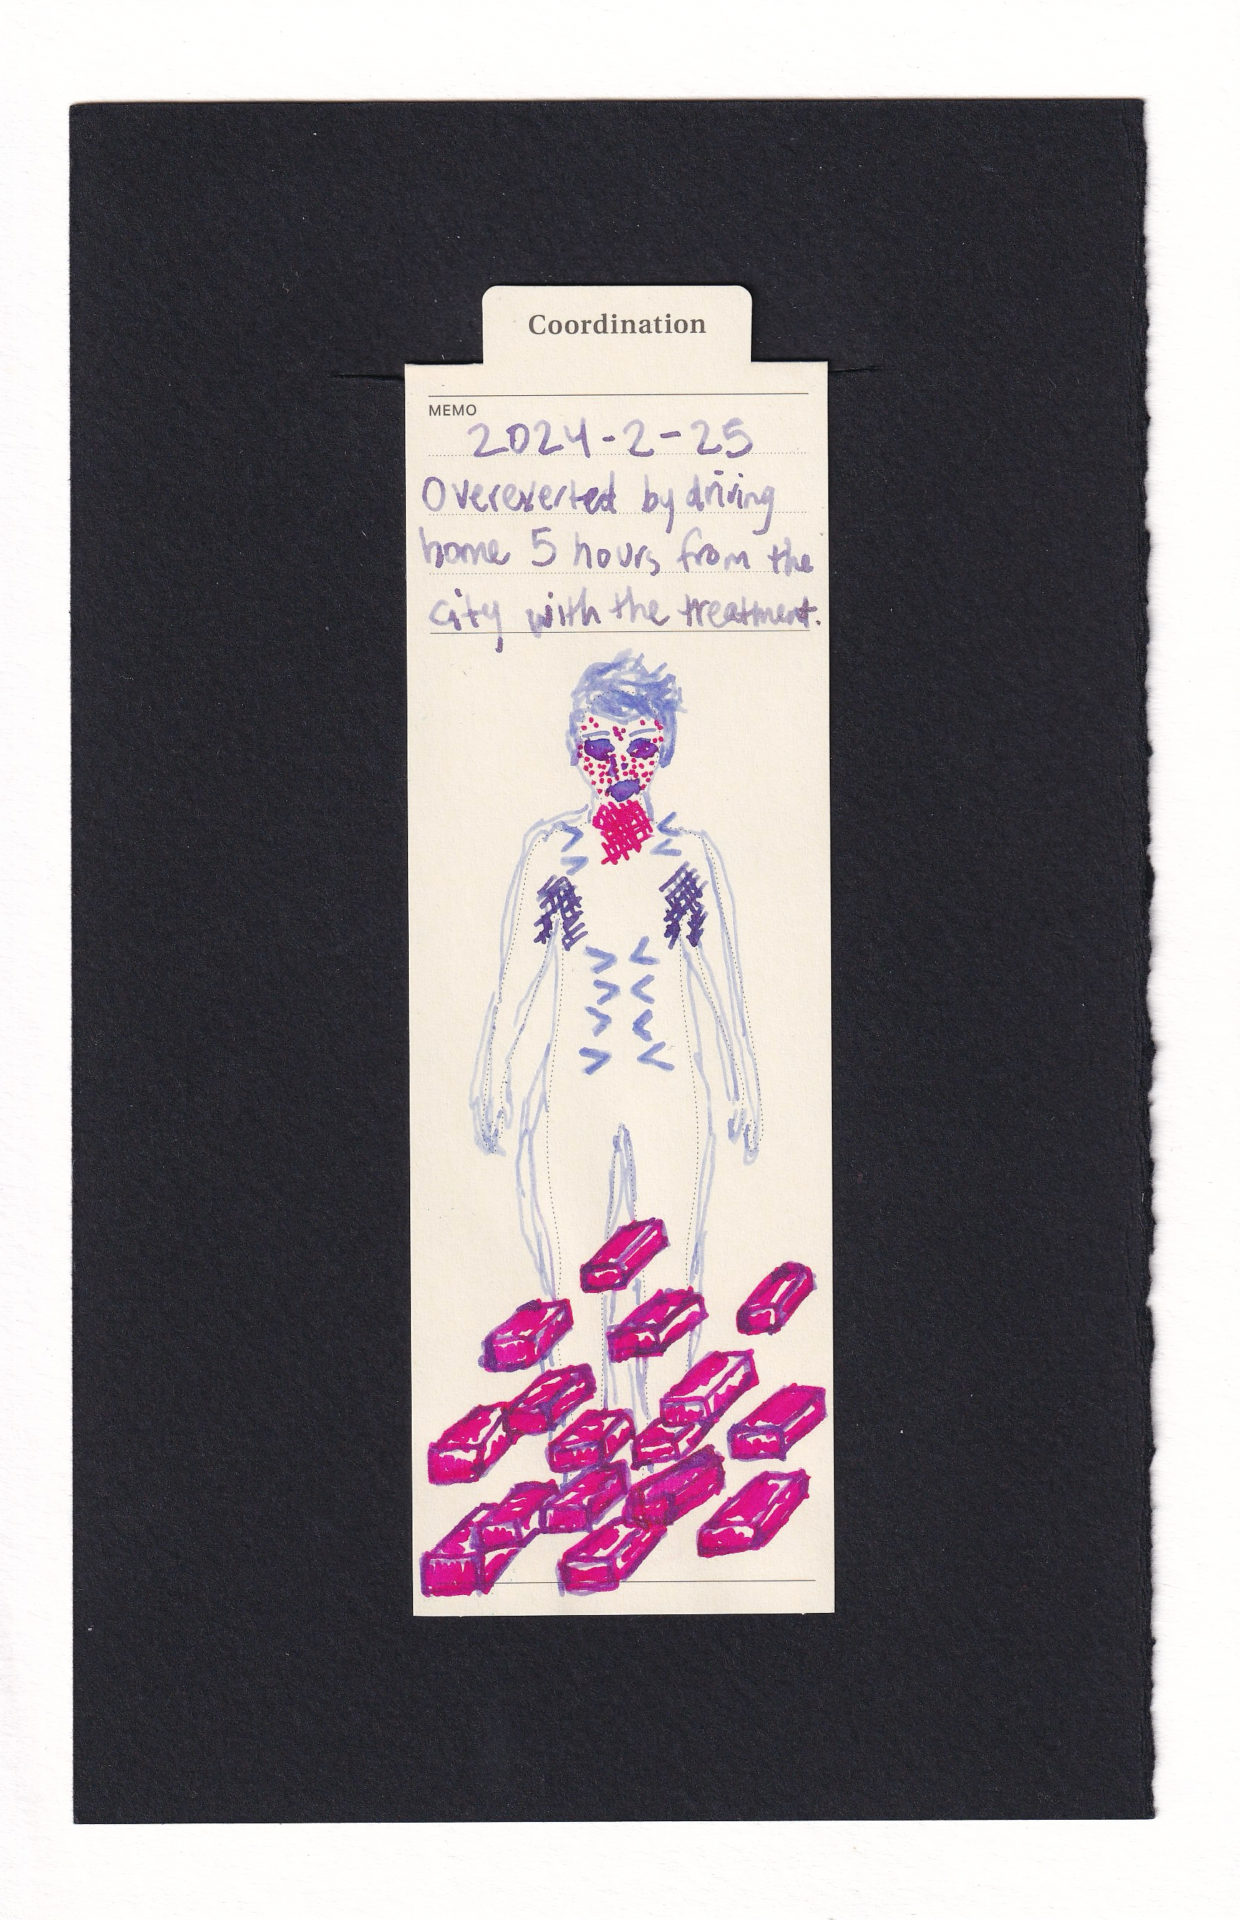 Figure on a manila bookmark. The body is outlined in shaky lavender, with short lavender hair. The face is speckled with hives, especially on the cheeks, and hatch marks on the neck. There are darker hatch marks in the armpits, and pinch > < symbols along the lower abdomen and upper neck/shoulders. At the base are tons of layered icons of isometric bricks, covering the lower body. It would be so exhausting and sharp and difficult and impossible to move with the heft of the bricks.